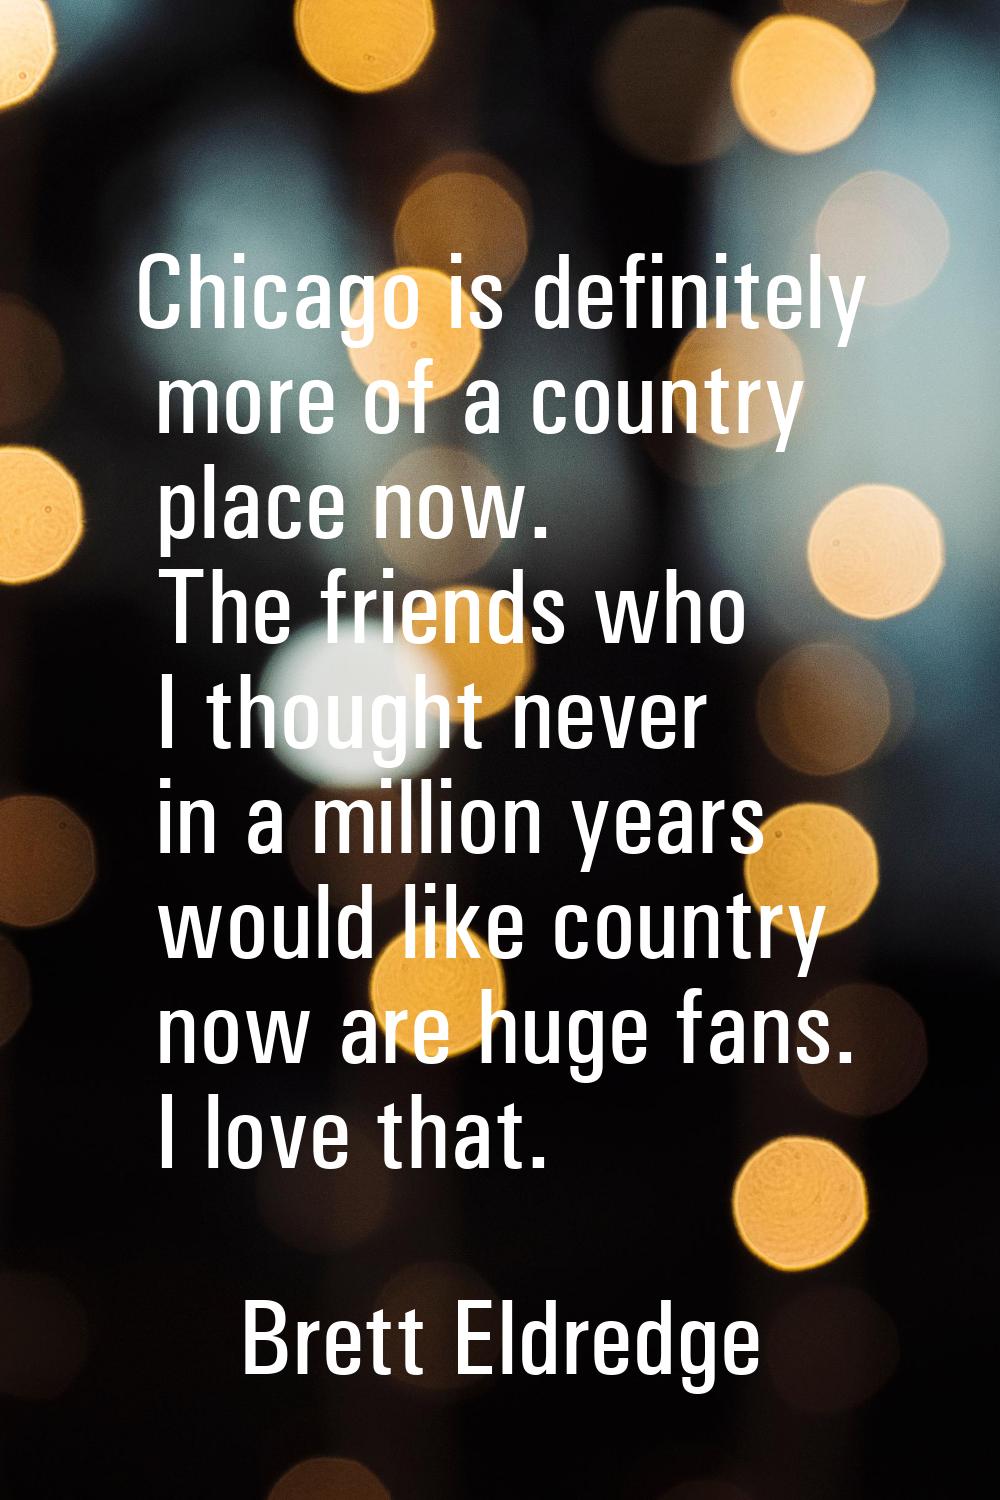 Chicago is definitely more of a country place now. The friends who I thought never in a million yea